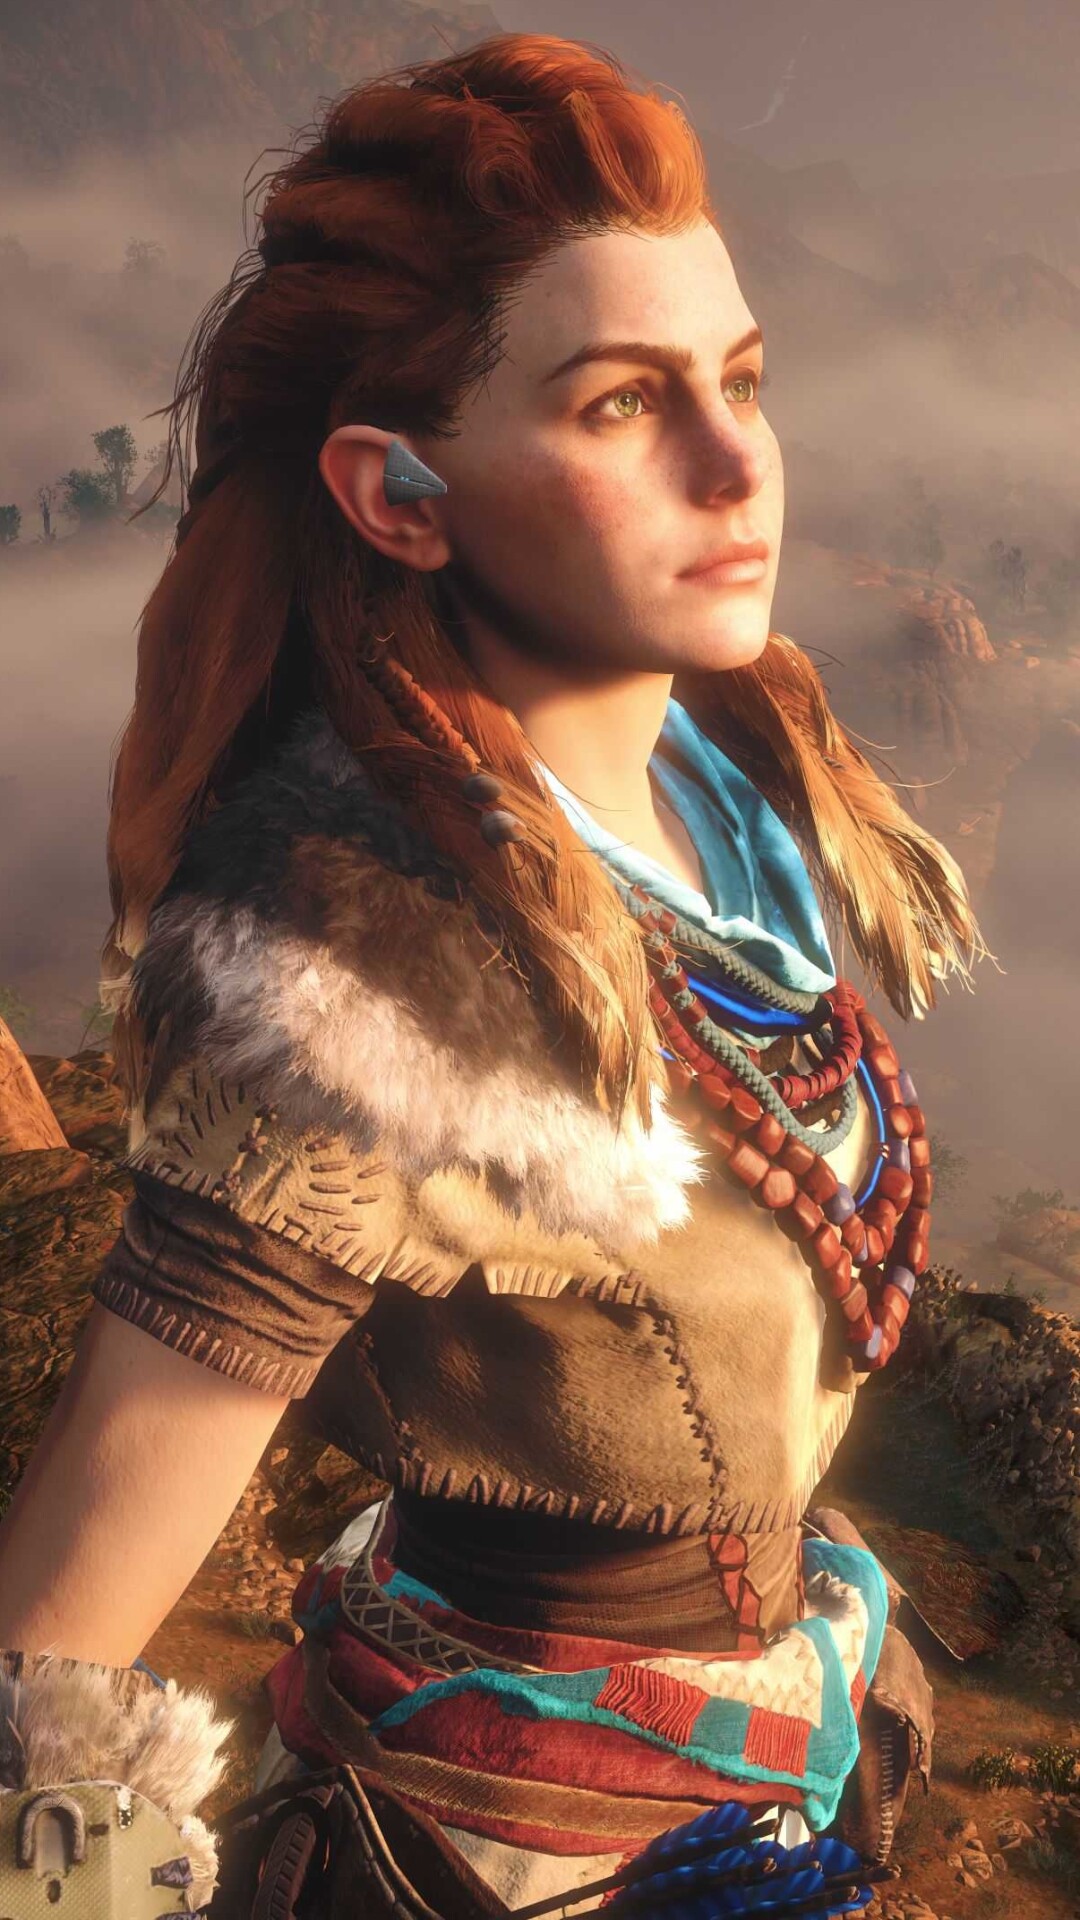 Horizon Zero Dawn: Players take control of Aloy, a hunter who ventures through a post-apocalyptic land ruled by robotic creatures. 1080x1920 Full HD Background.